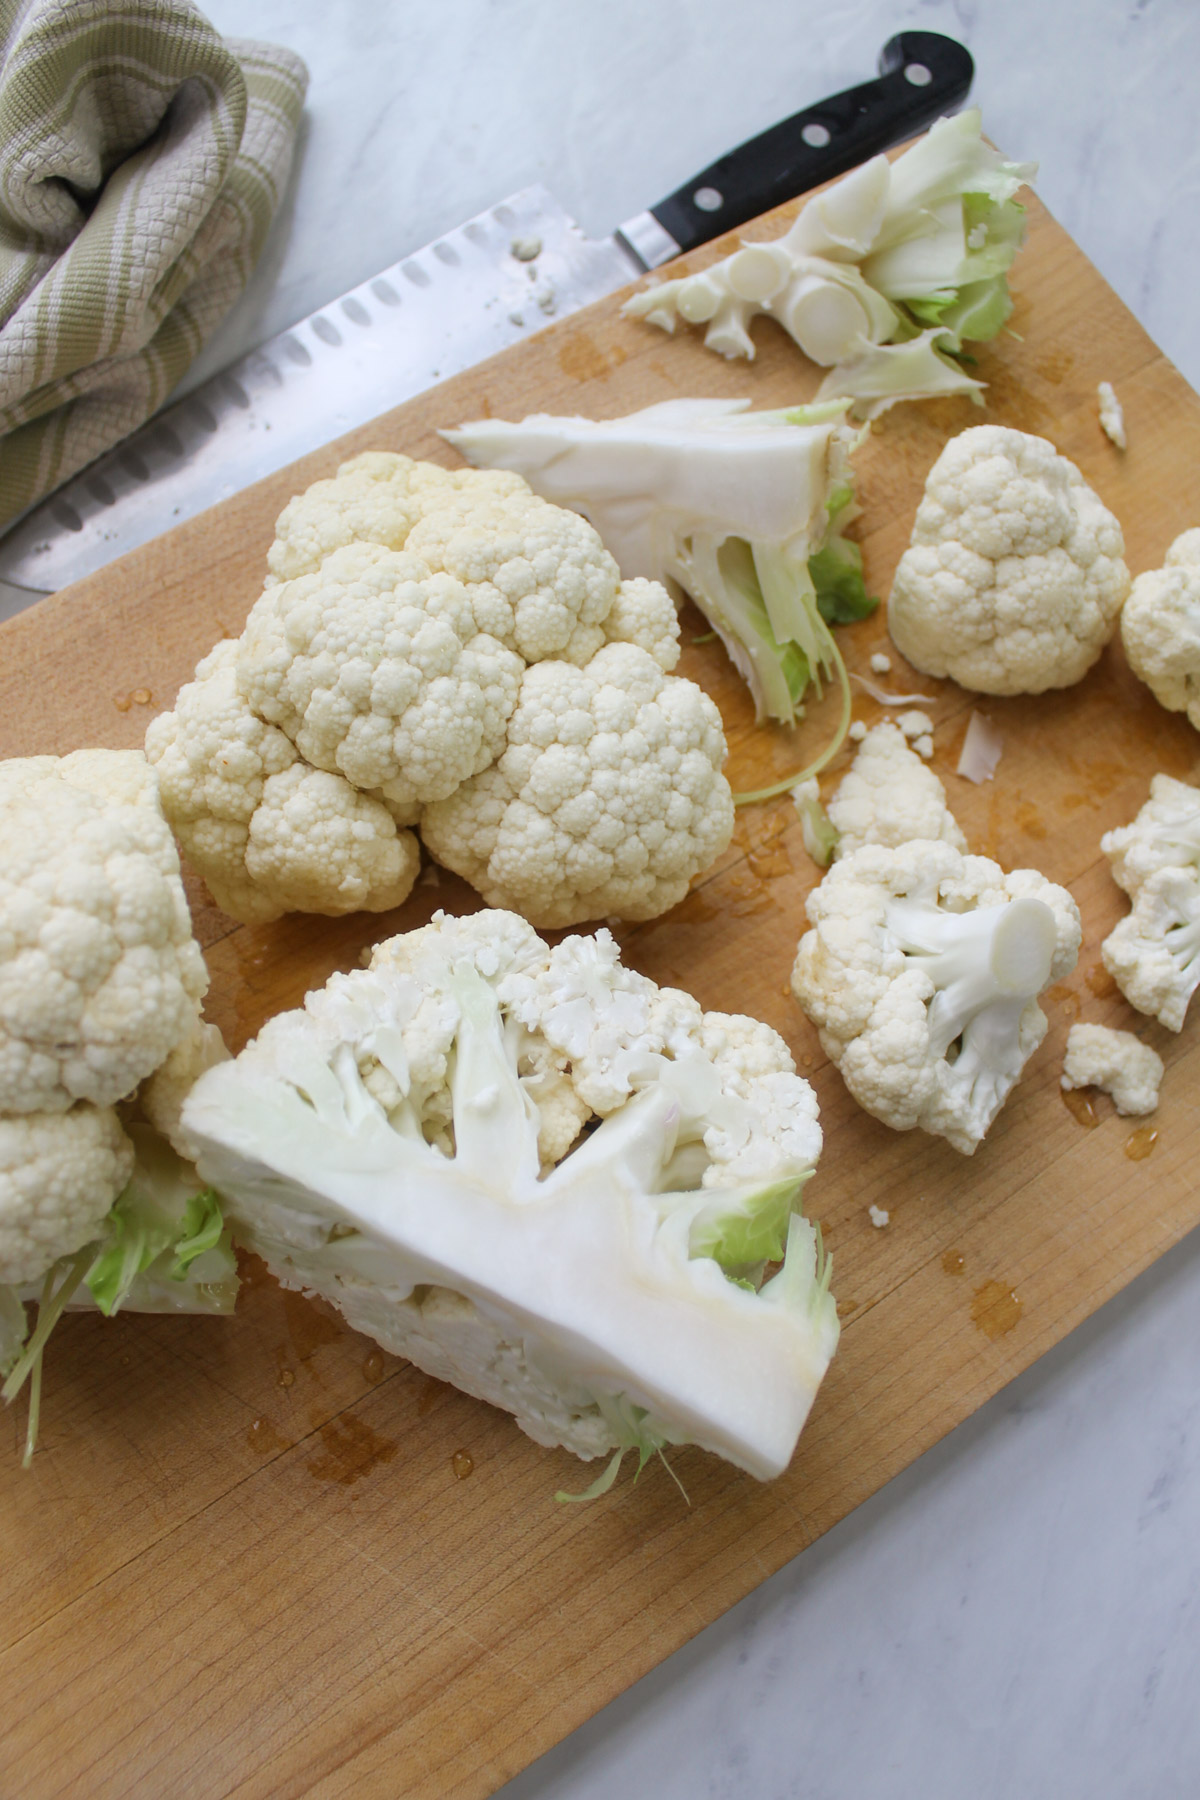 Cutting a head of cauliflower into quarters to remove the core.